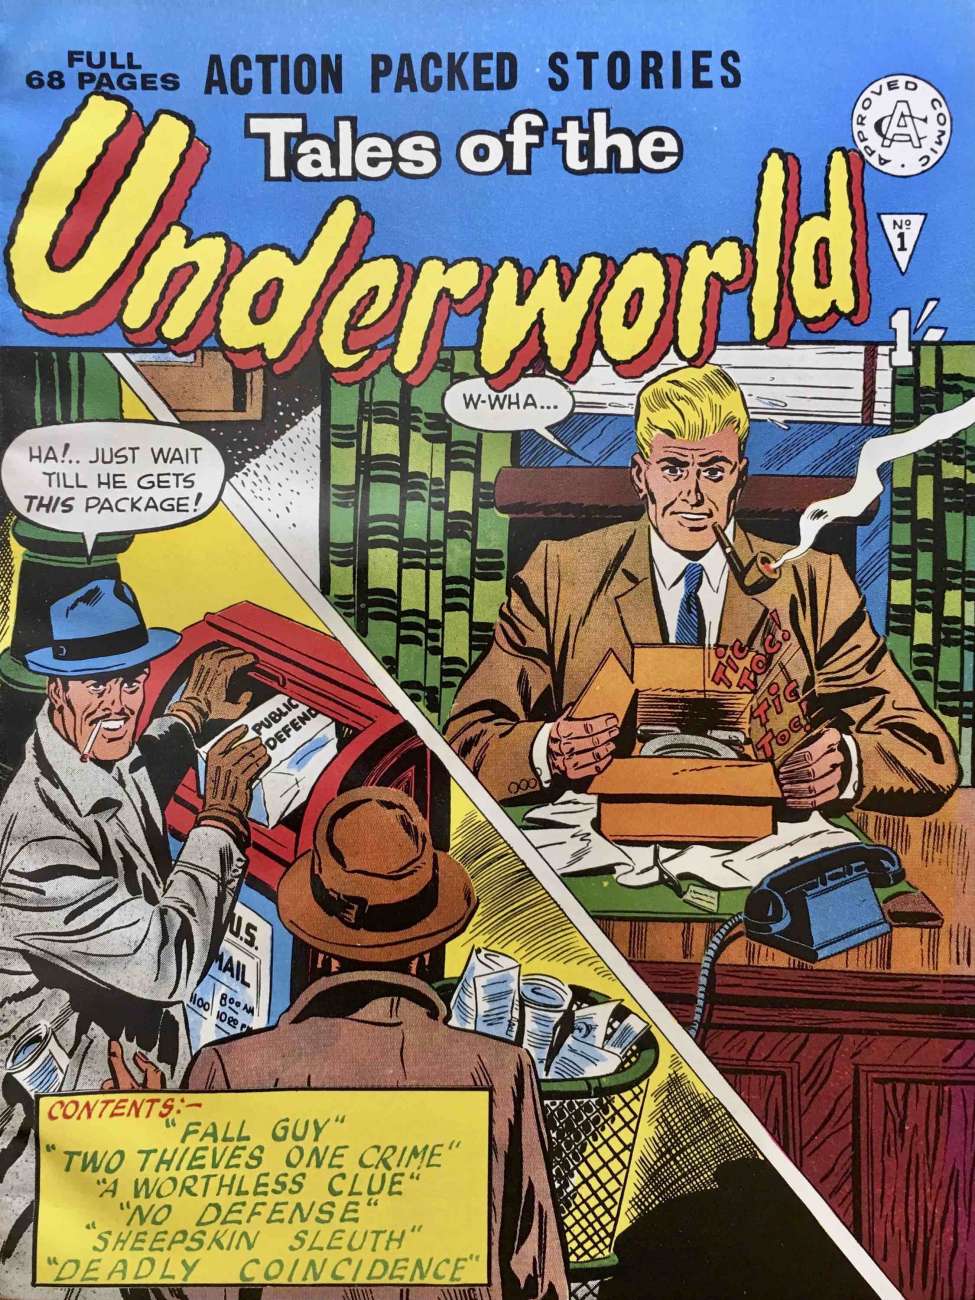 Book Cover For Tales of the Underworld 1